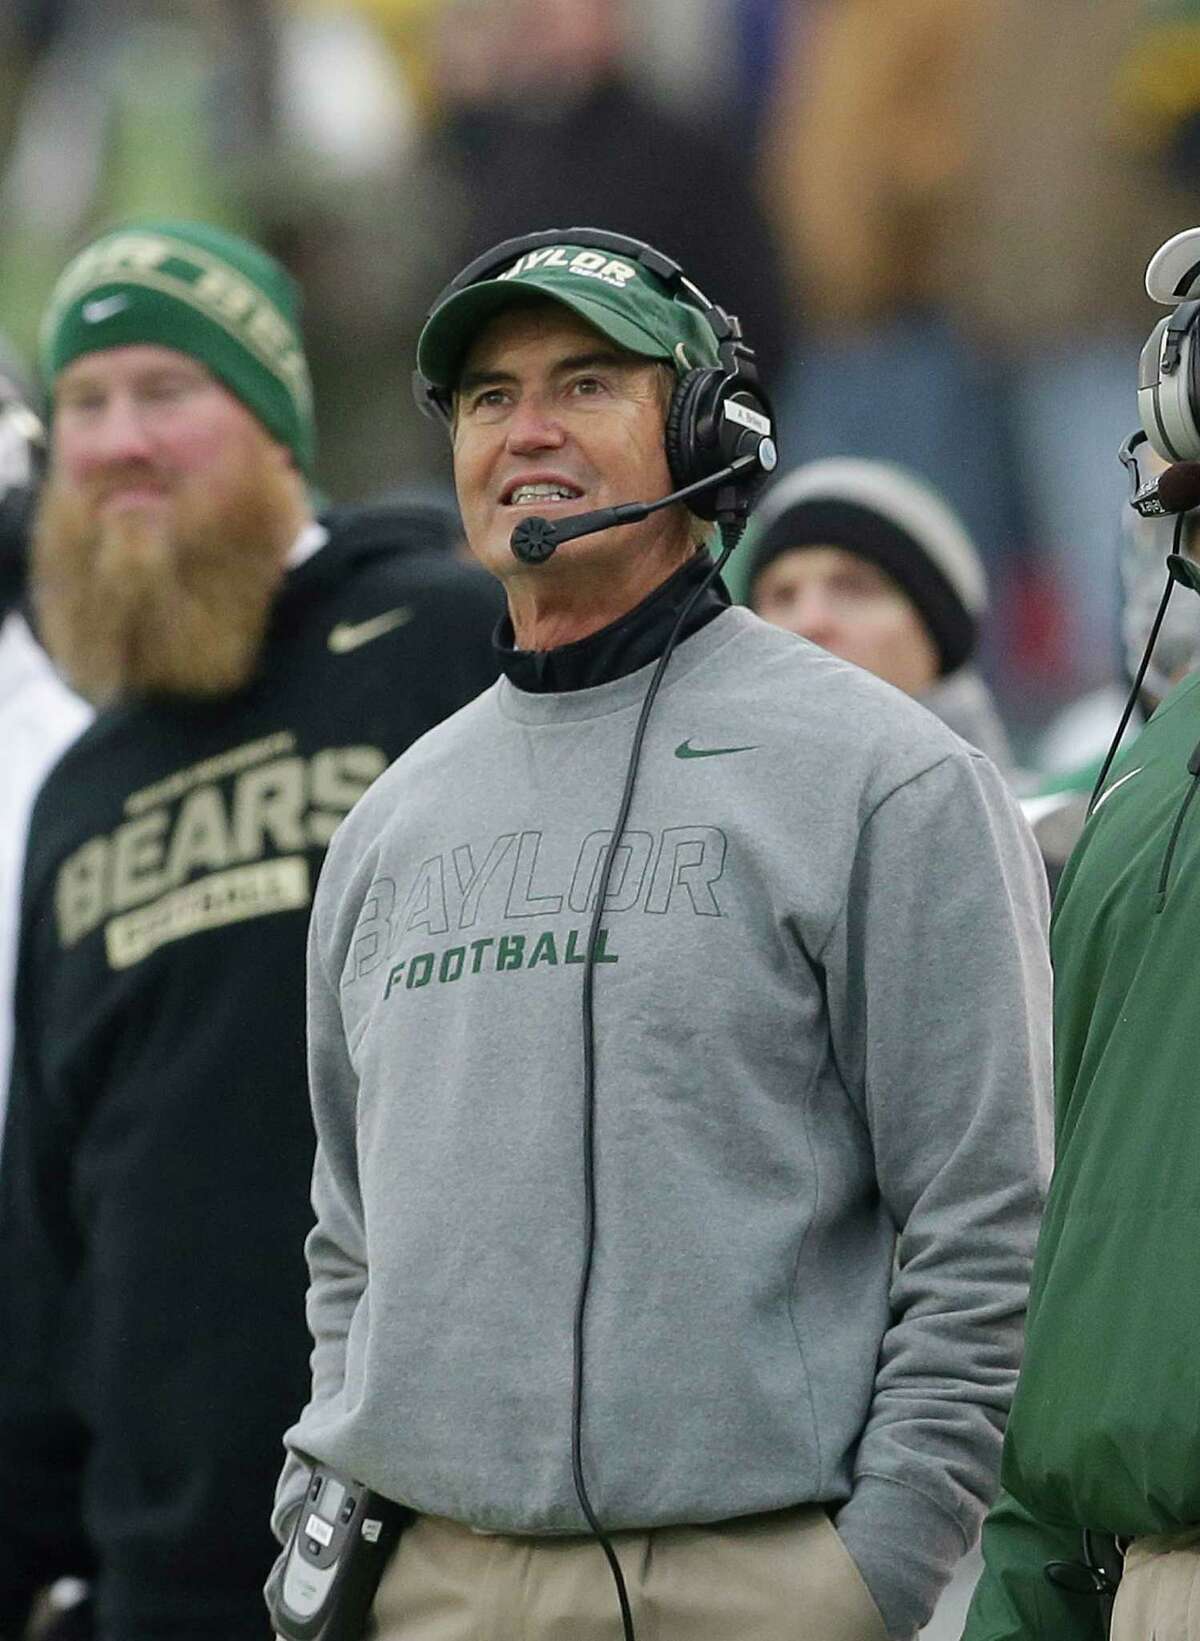 Baylor coach Art Briles has joked about his NFL prospects but has his mind set on today's game.